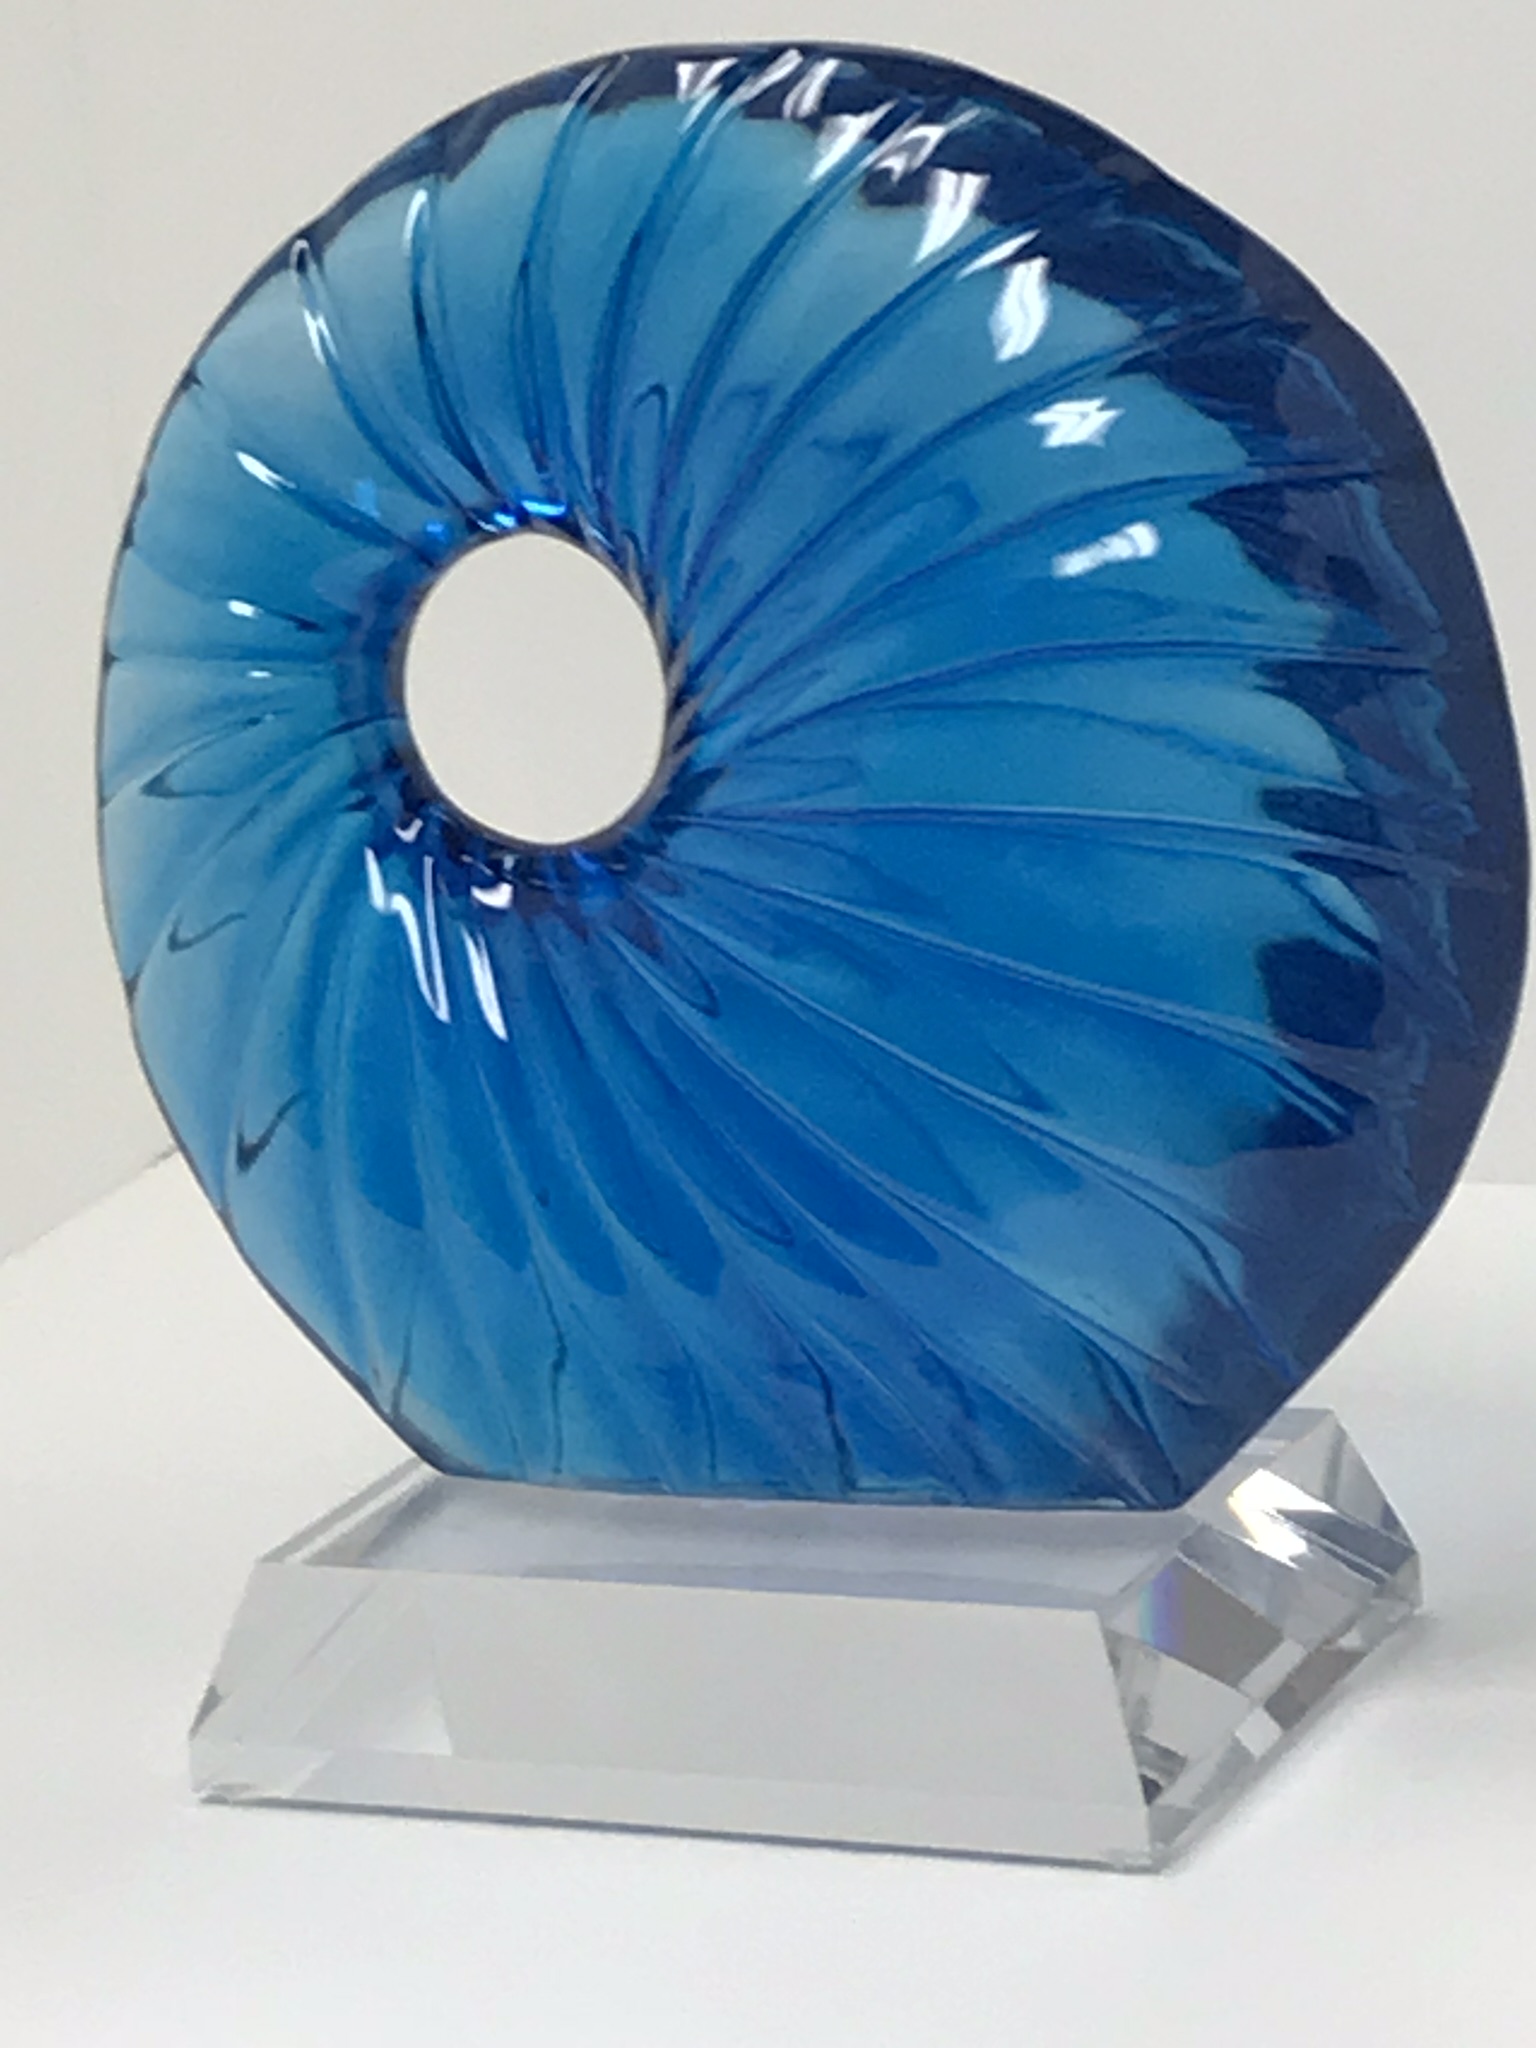 Sculpture Acrylic Blue Shell by Grace Absi